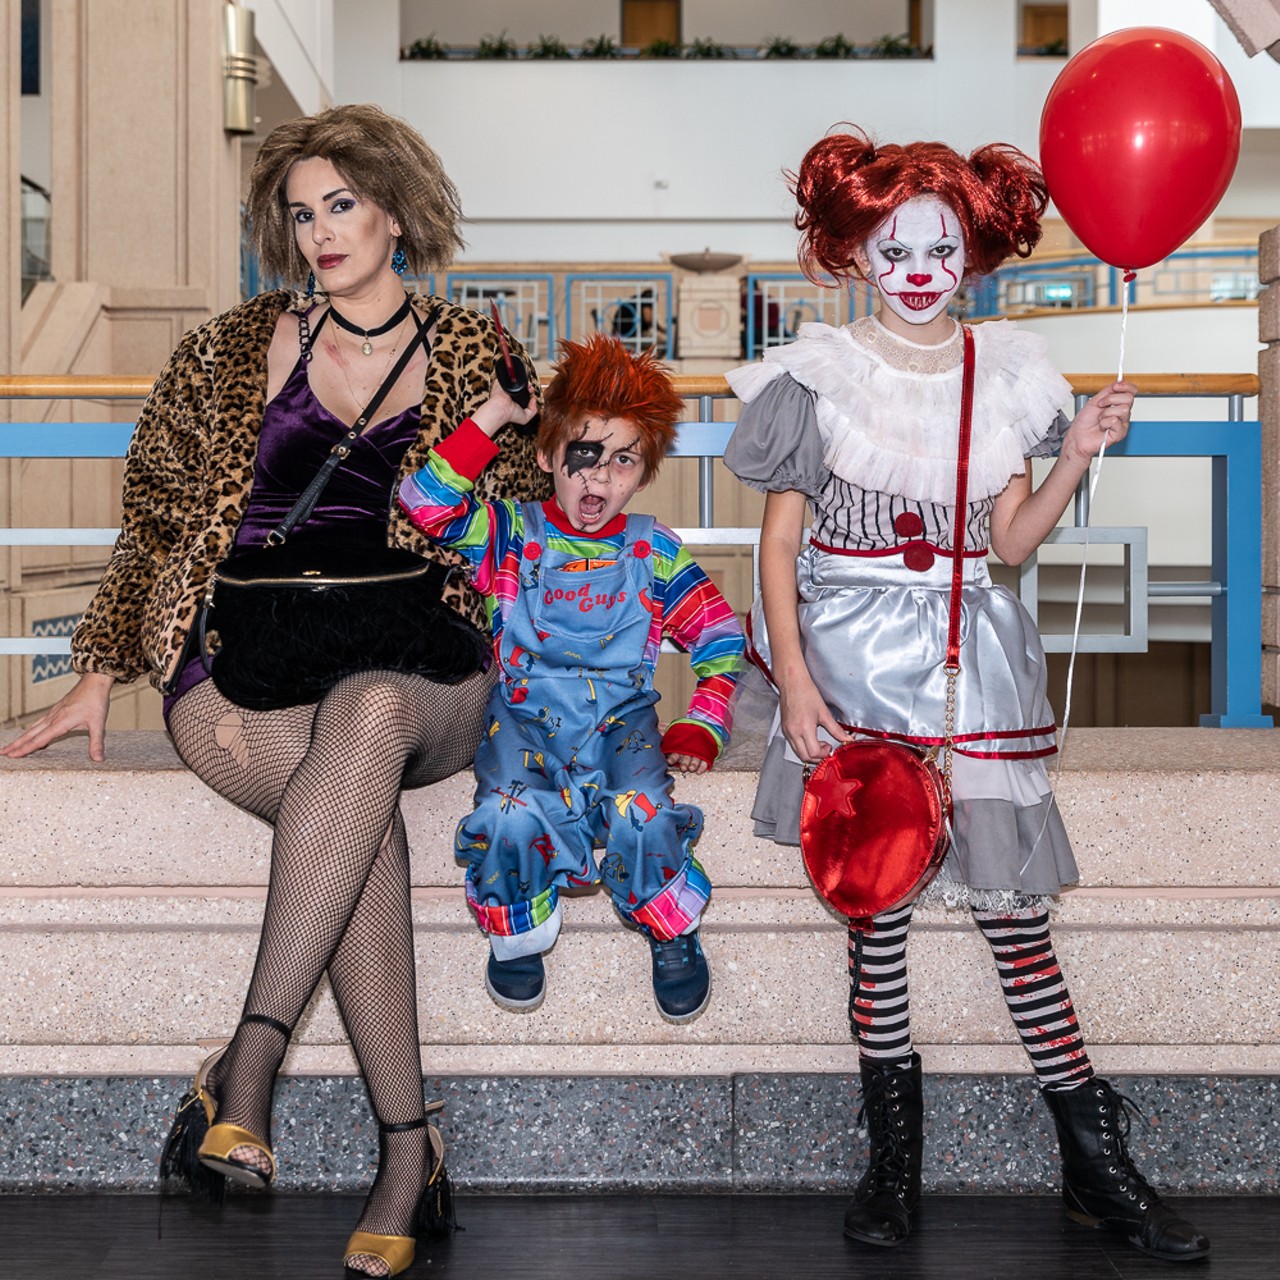 Photos from Tampa's 2019 Spooky Empire costume contest and more